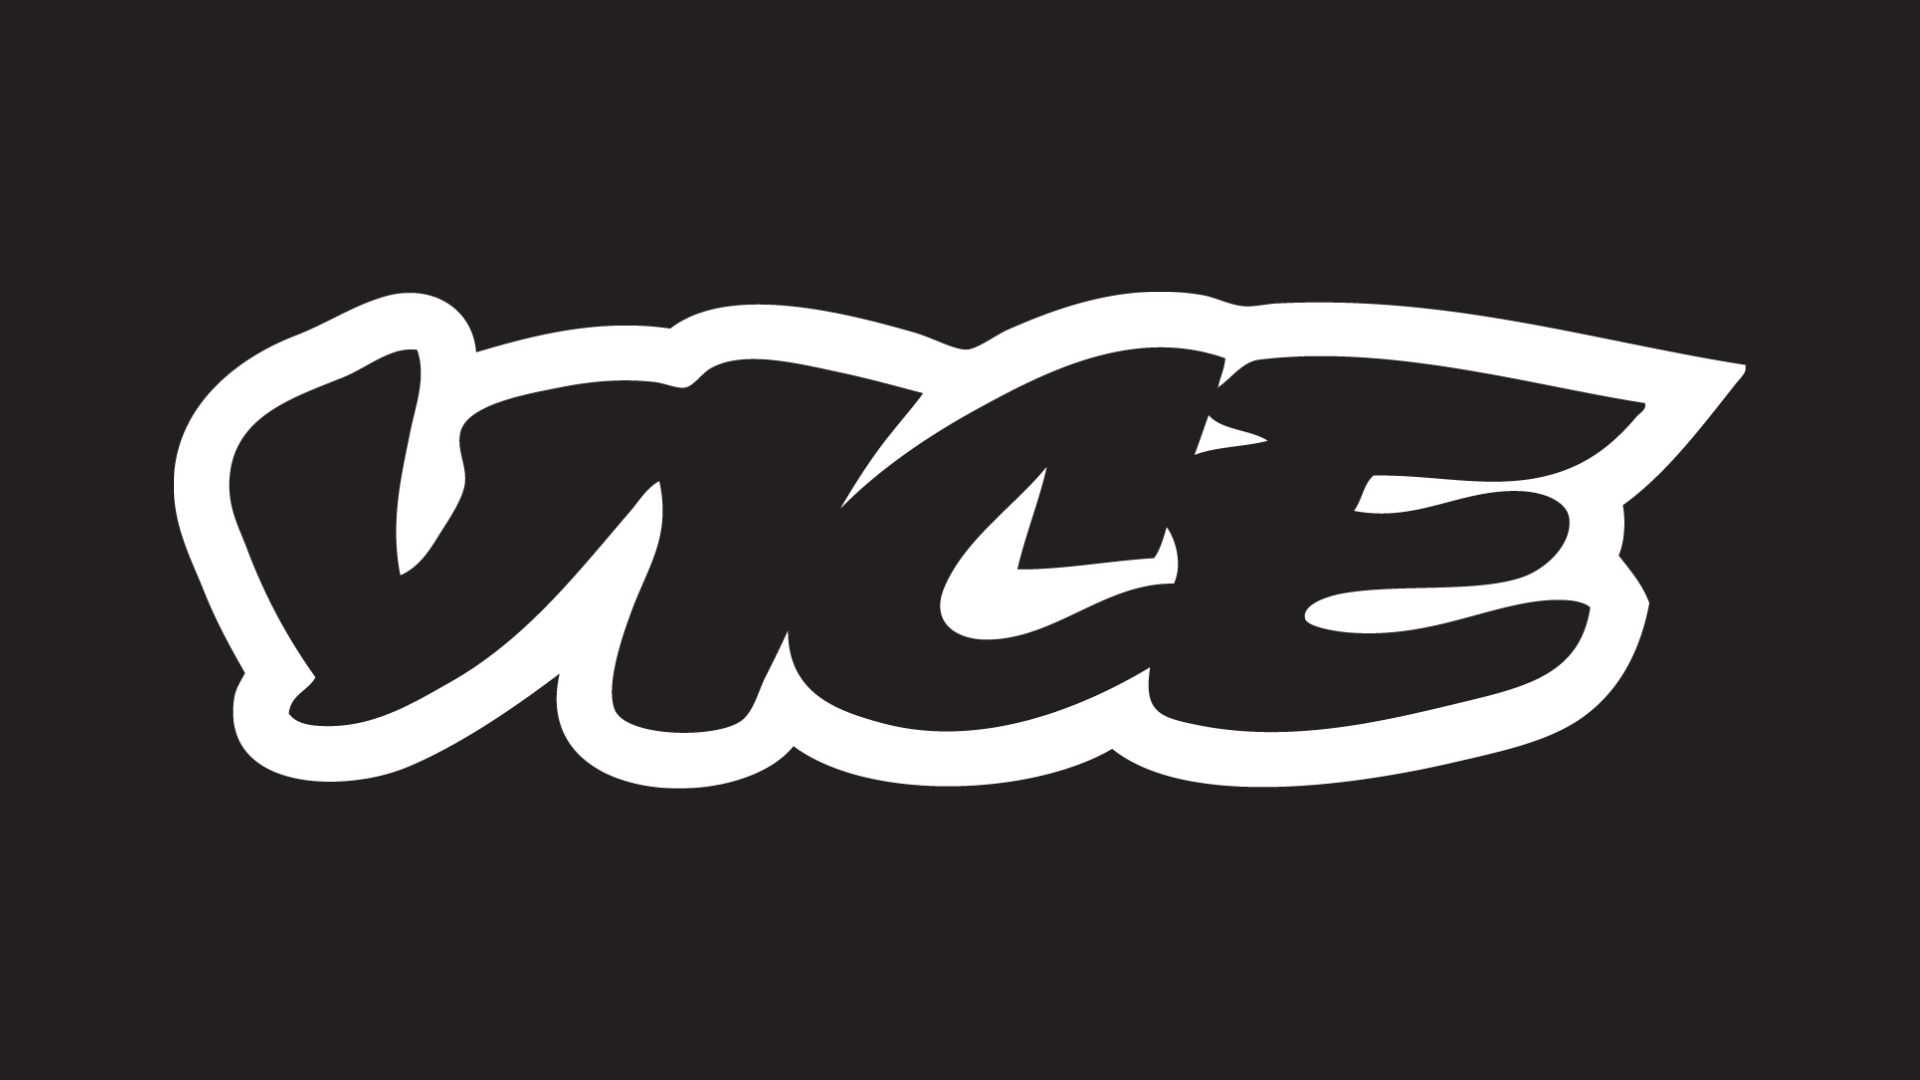 Vice Media lays off workers, stops publishing on site